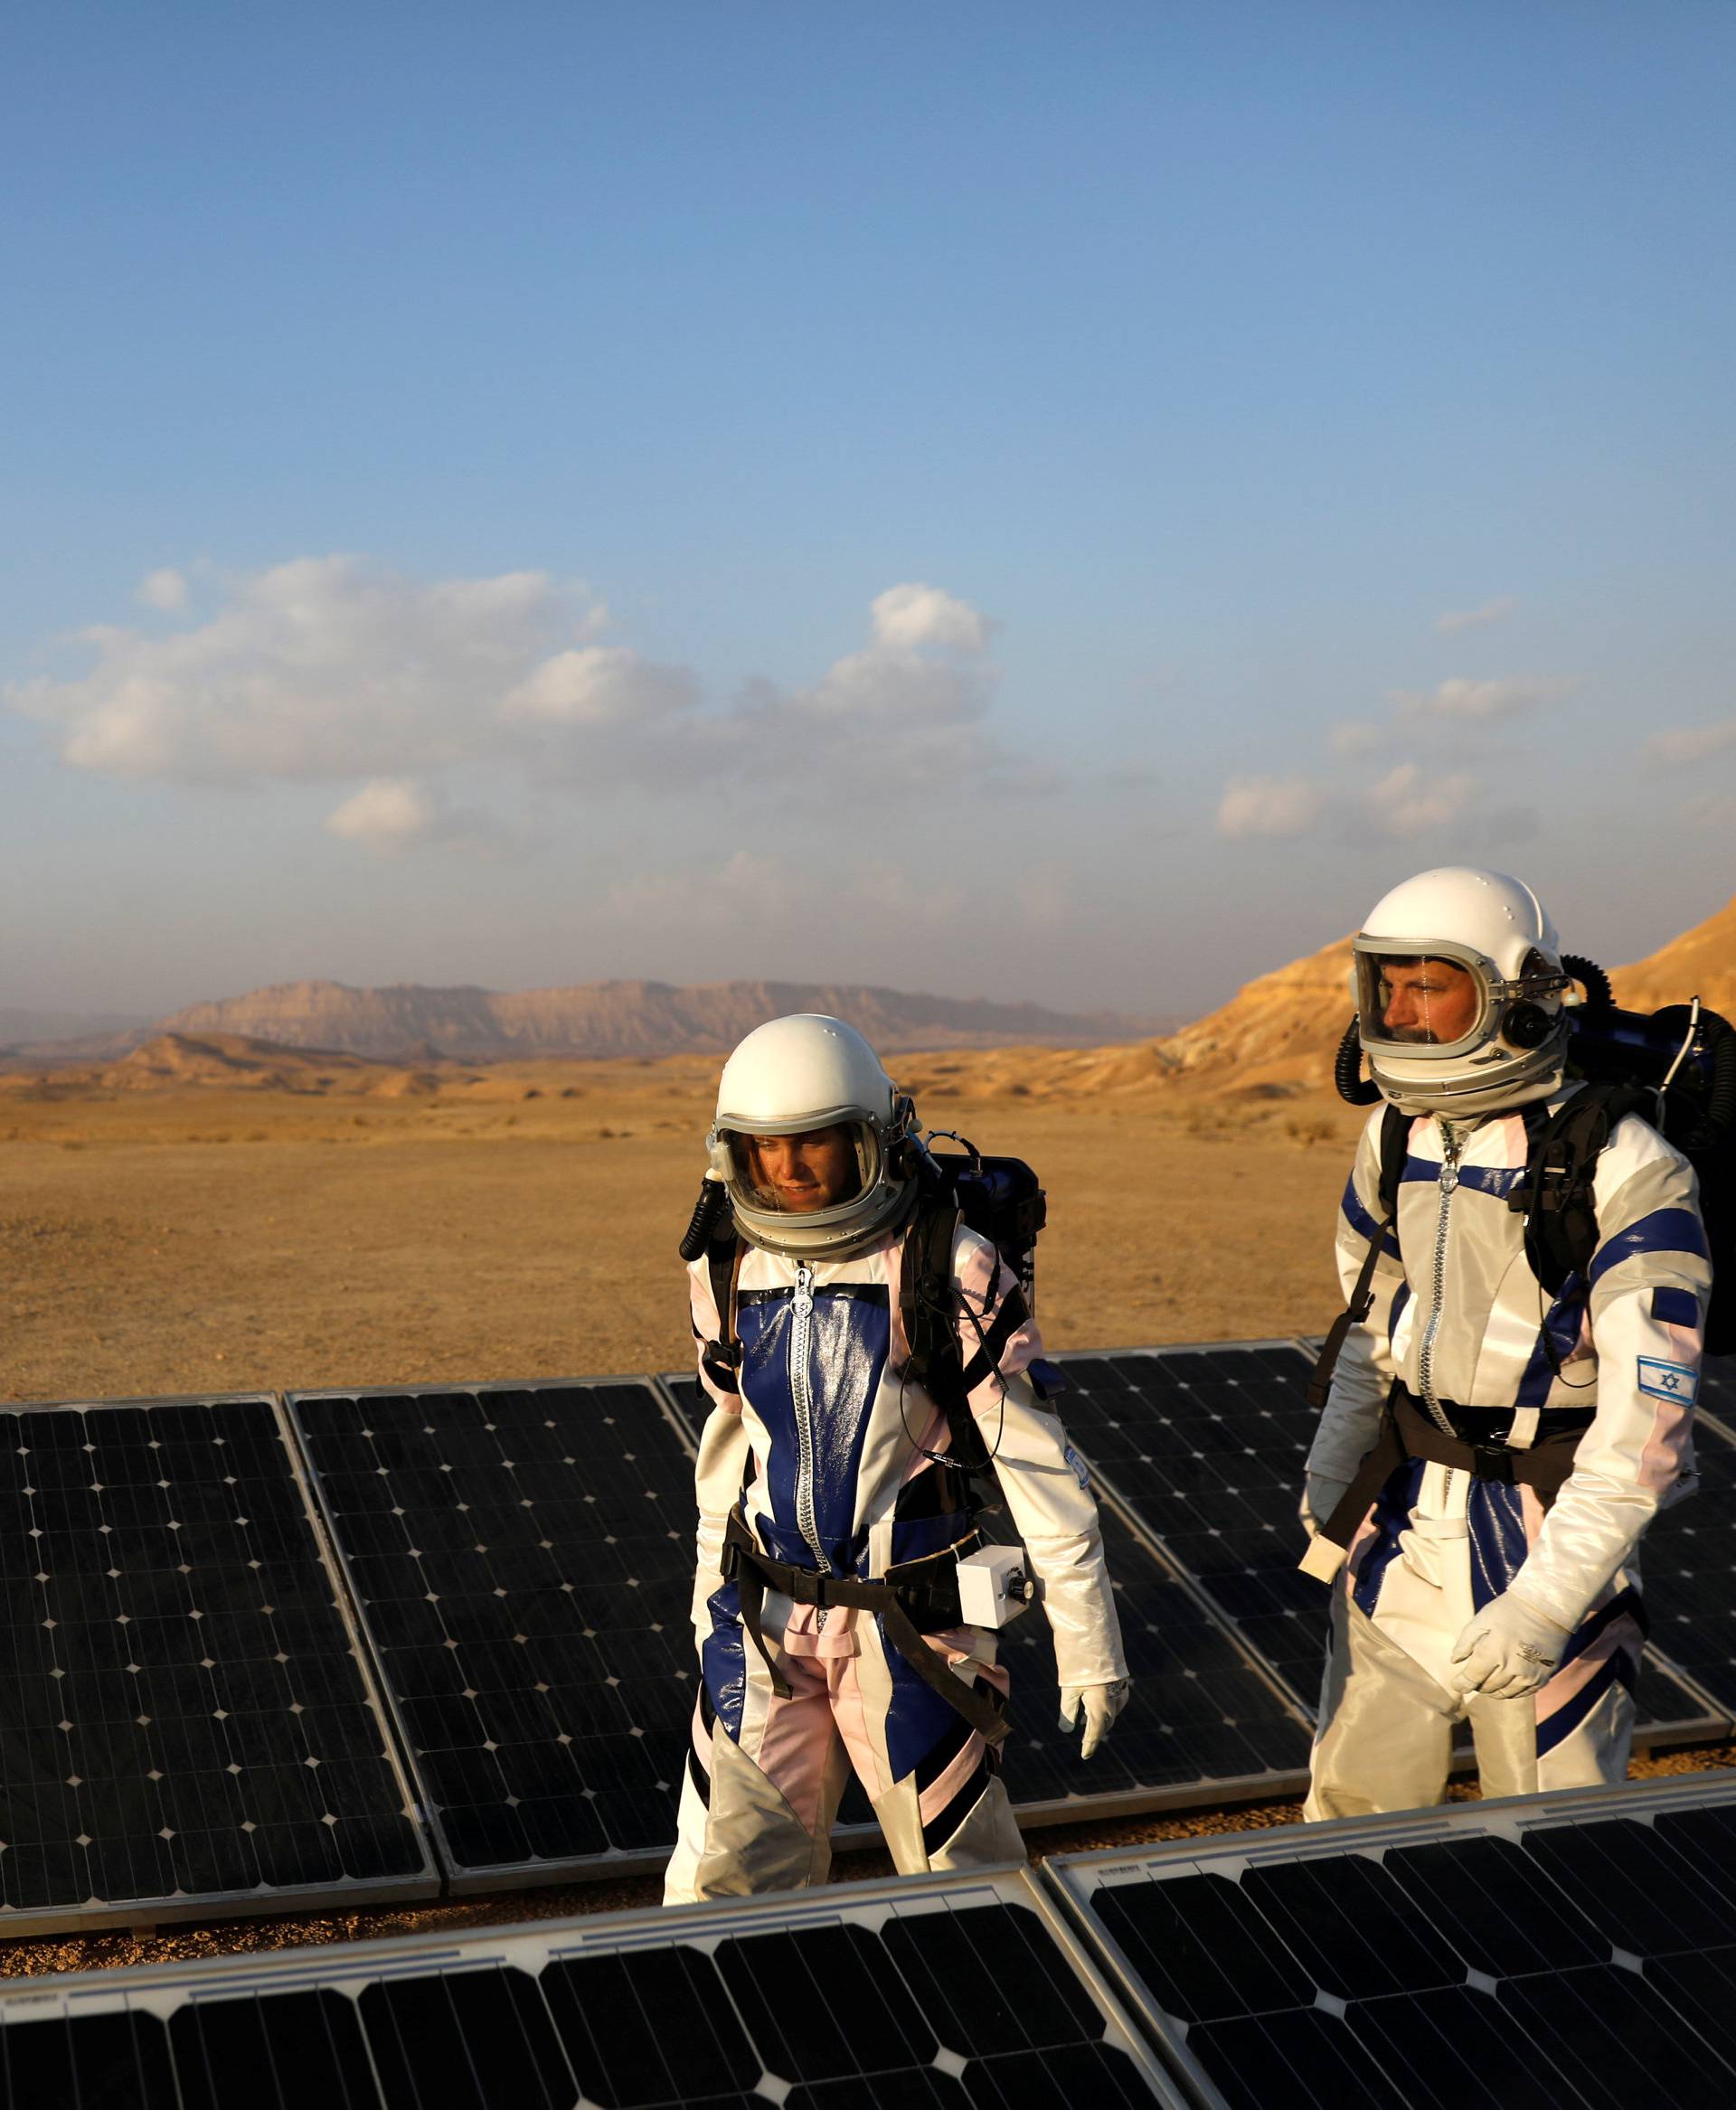 Israeli scientists participate in an experiment simulating a mission to Mars, at the D-MARS Desert Mars Analog Ramon Station project of Israel's Space Agency, Ministry of Science, near Mitzpe Ramon